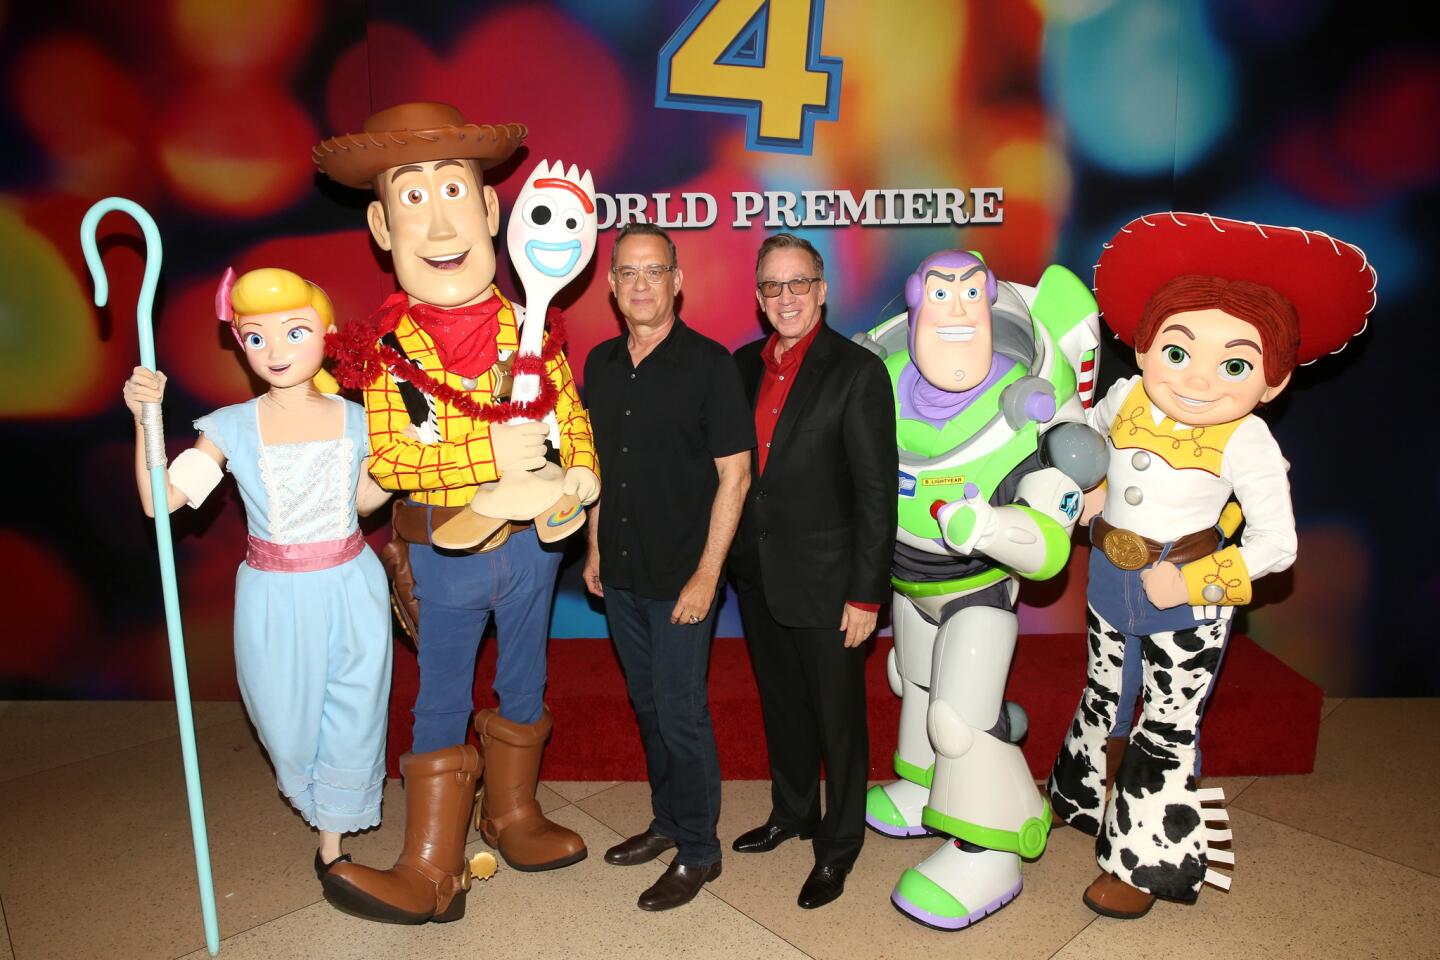 Tom Hanks (L) and Tim Allen pose with Bo Peep, Woody, Forky, Buzz Lightyear and Jessieat the world premiere of Disney and Pixar's "Toy Story 4" at the El Capitan Theatre in Hollywood, CA on Tuesday, June 11, 2019.